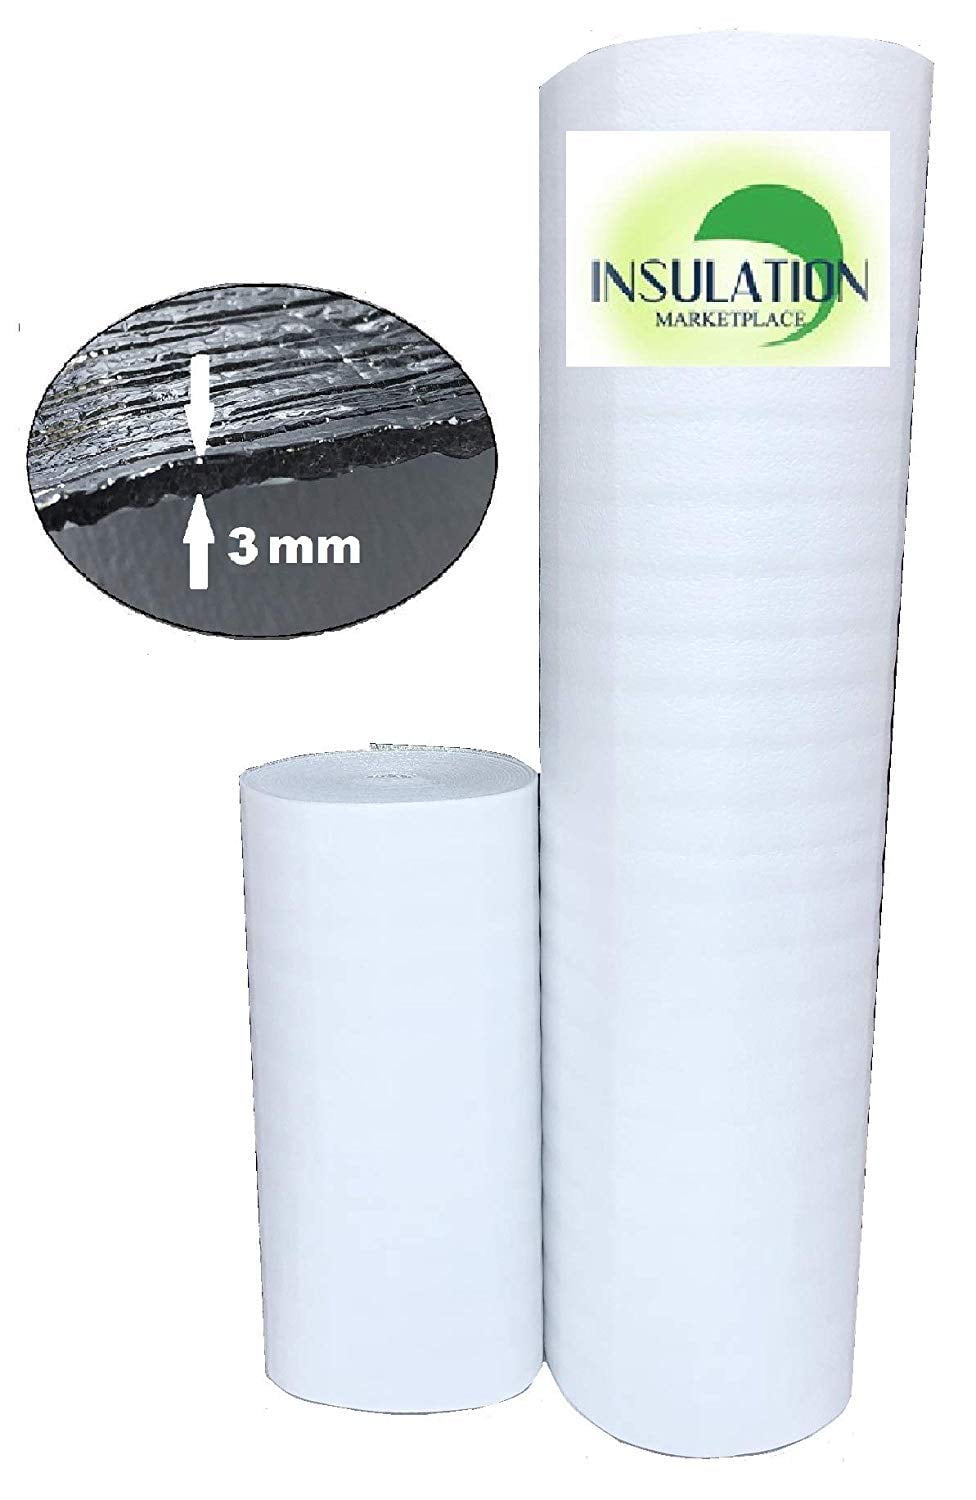 USEP 3MM Reflective White Foam Core Insulation RADIANT BARRIER 48''X50ft roll 